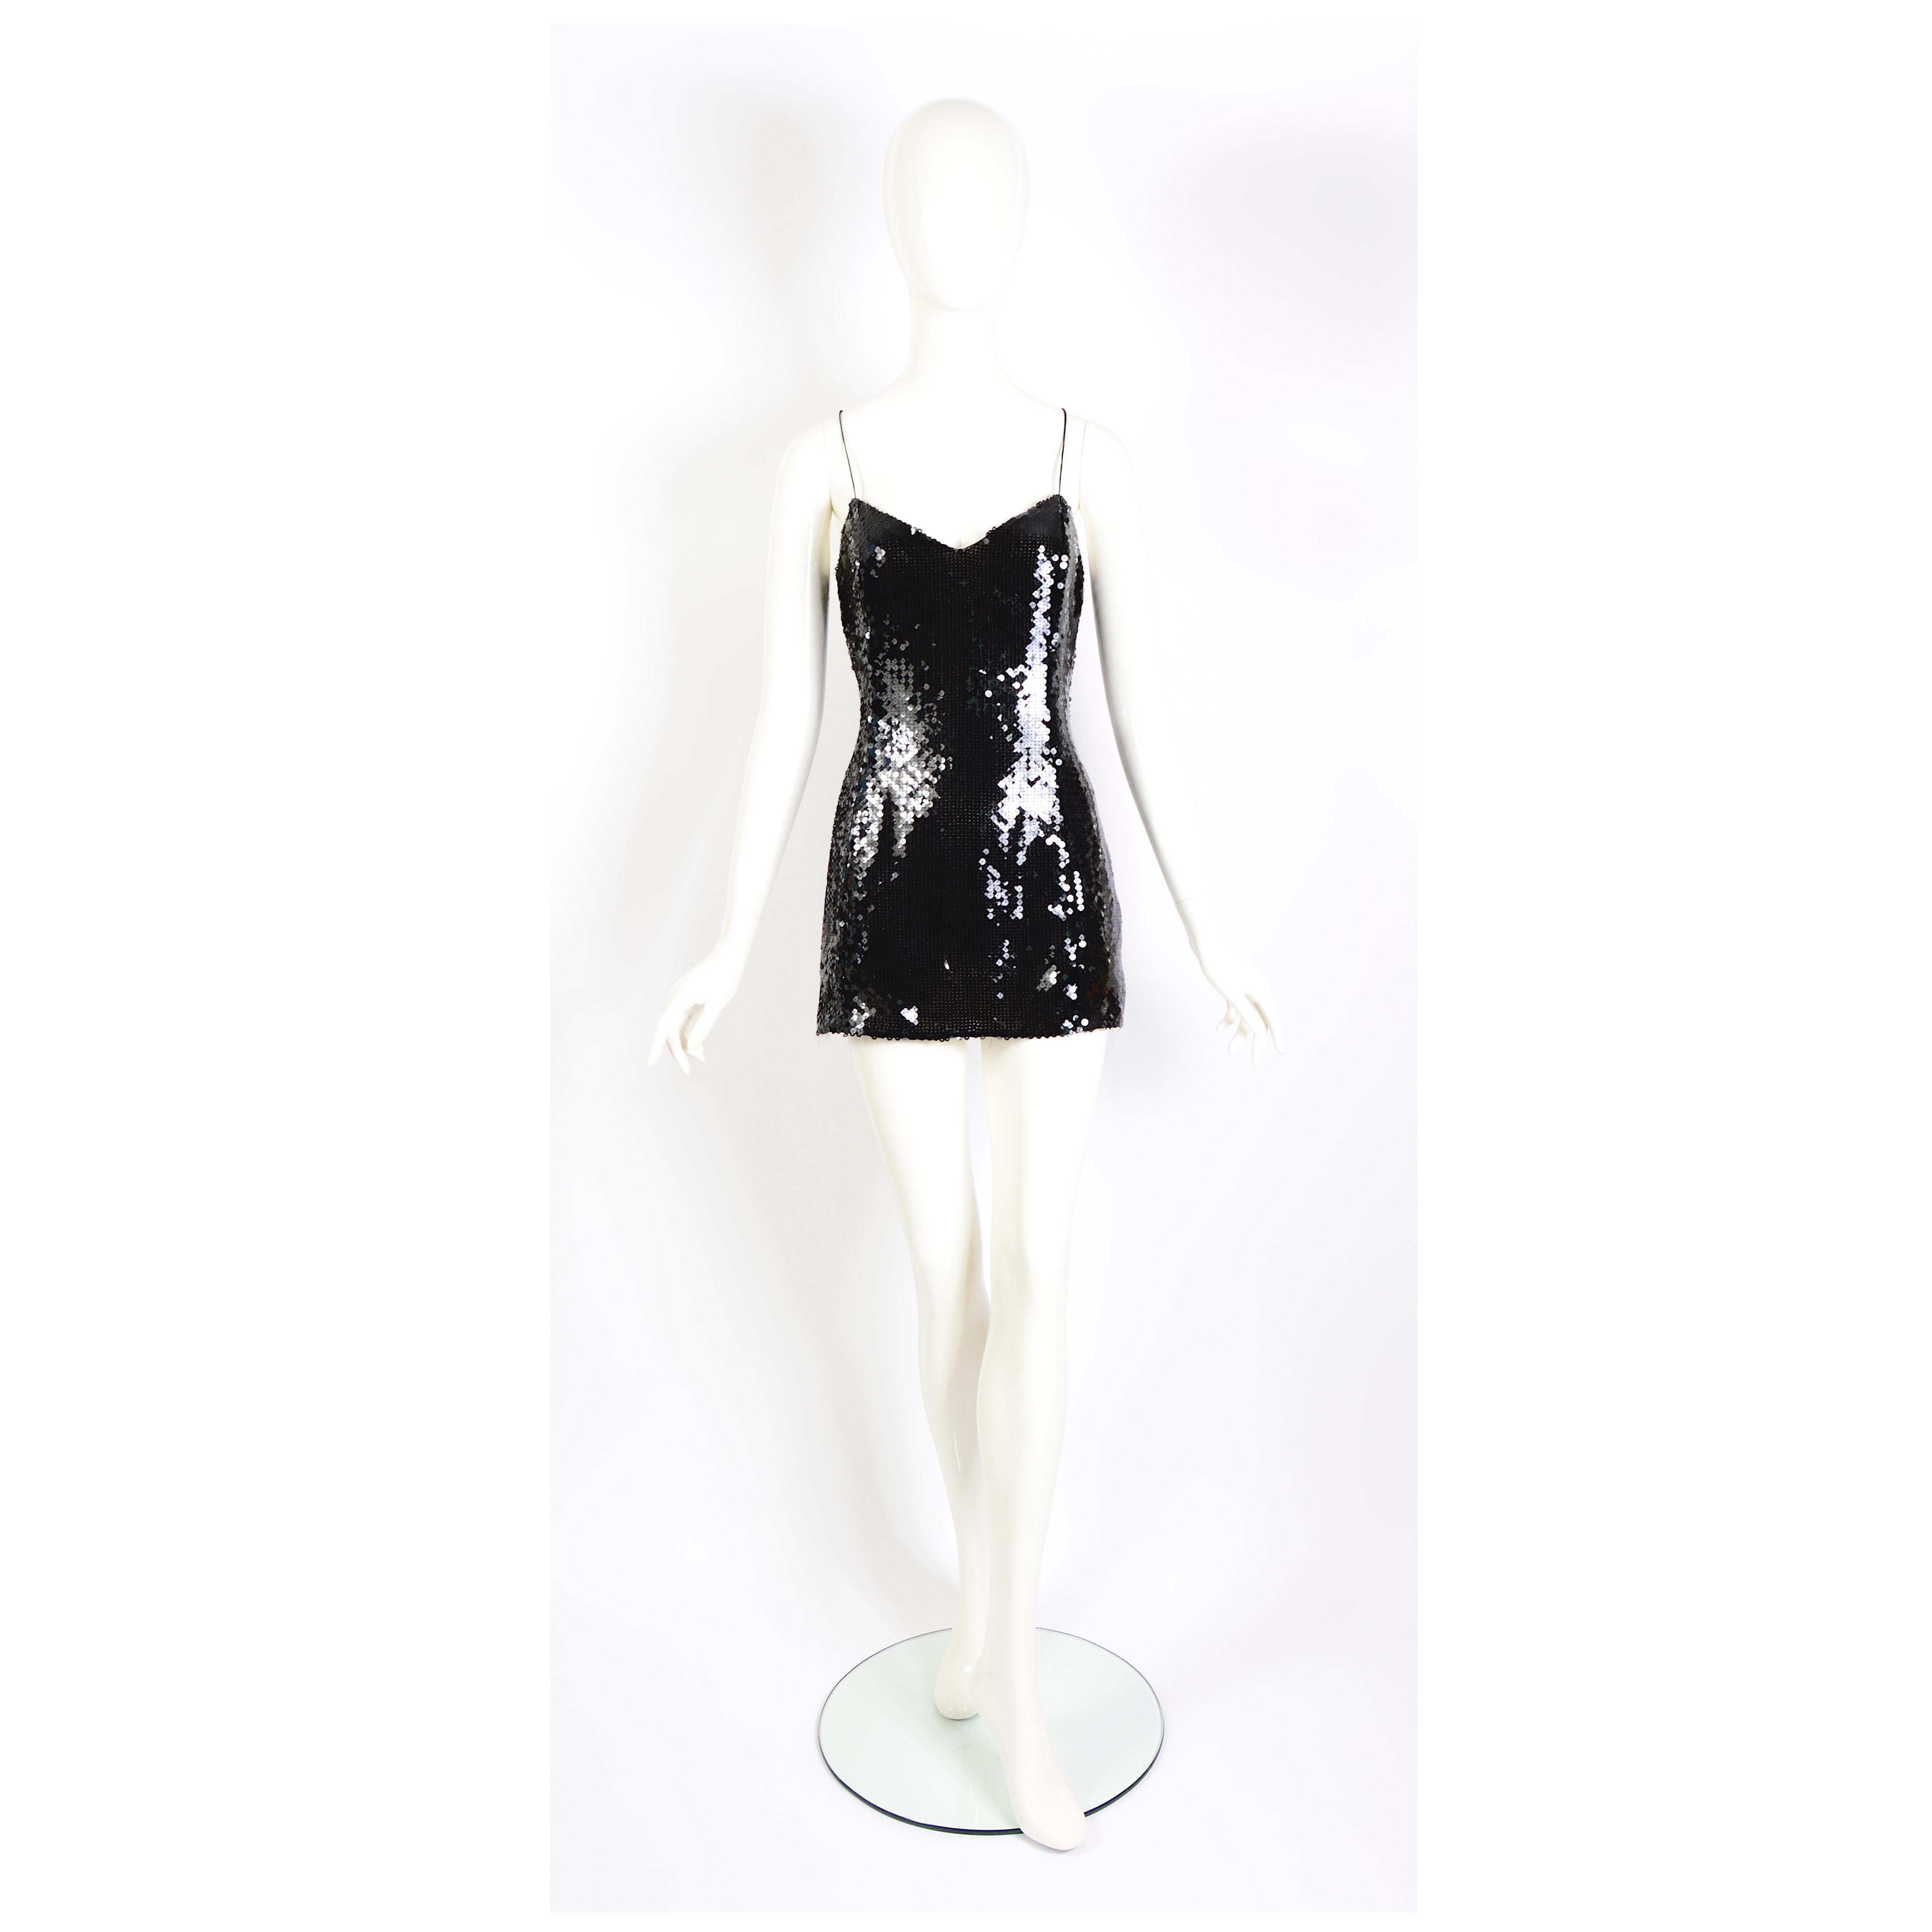 Adorable light as a feather Thierry Mugler couture Nr 1K710 vintage 1990s black sequins mini party dress or top.
Fully lined with a silk nude transparent fabric.
In good vintage condition, the side zipper of the dress closes with difficulty because